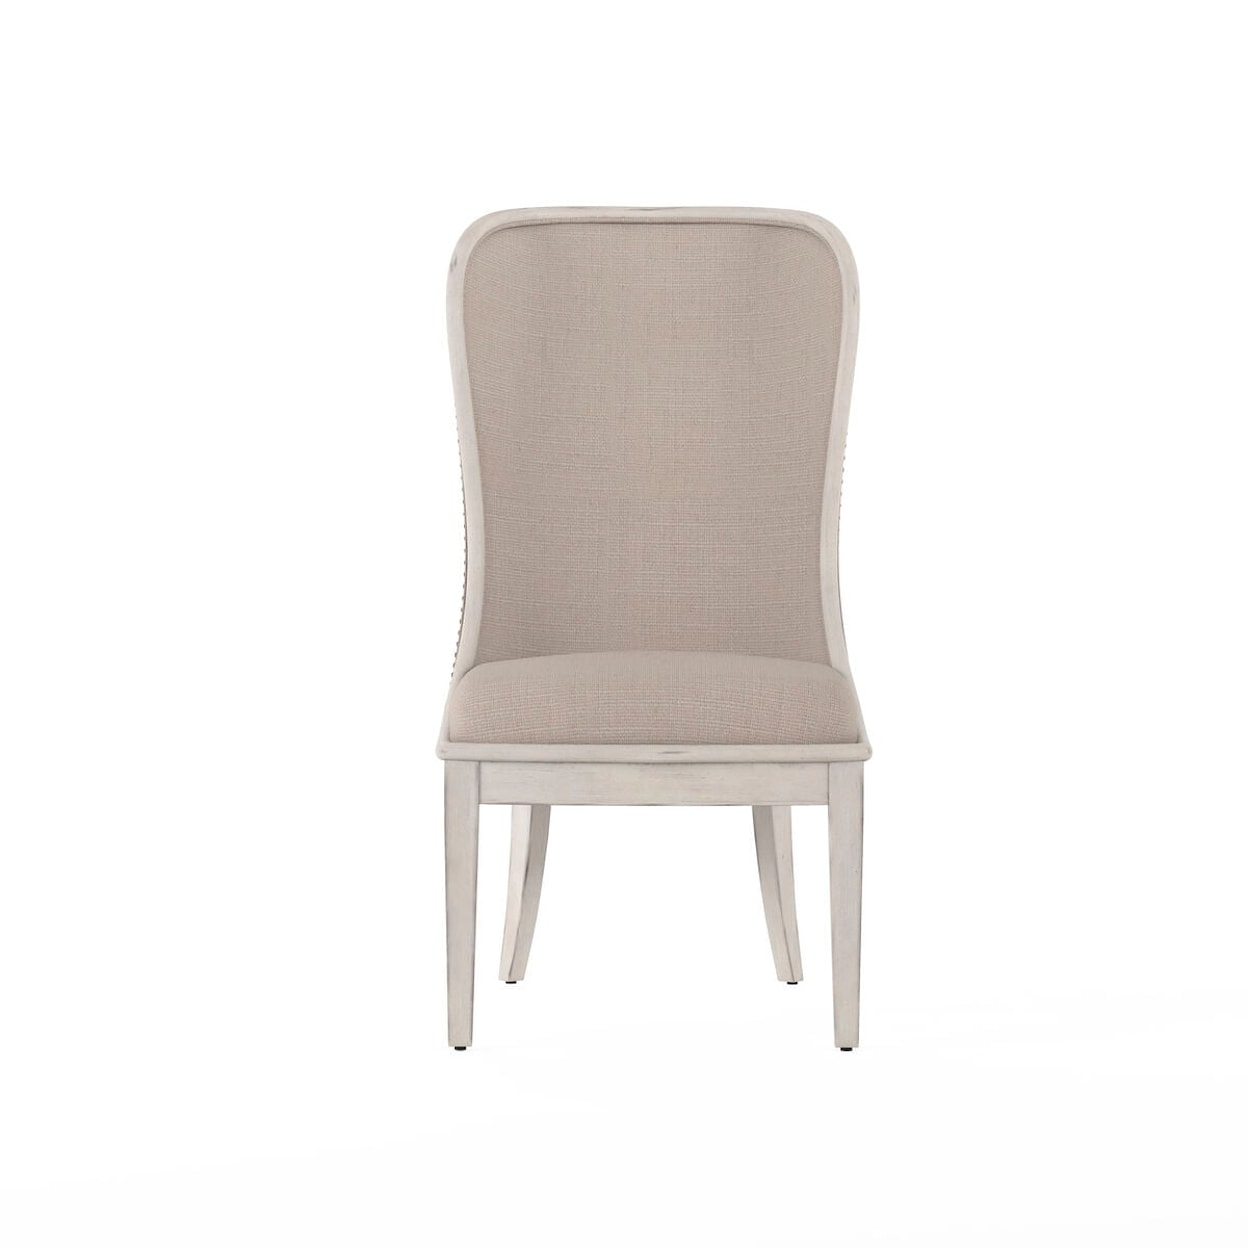 A.R.T. Furniture Inc Alcove Dining Chair